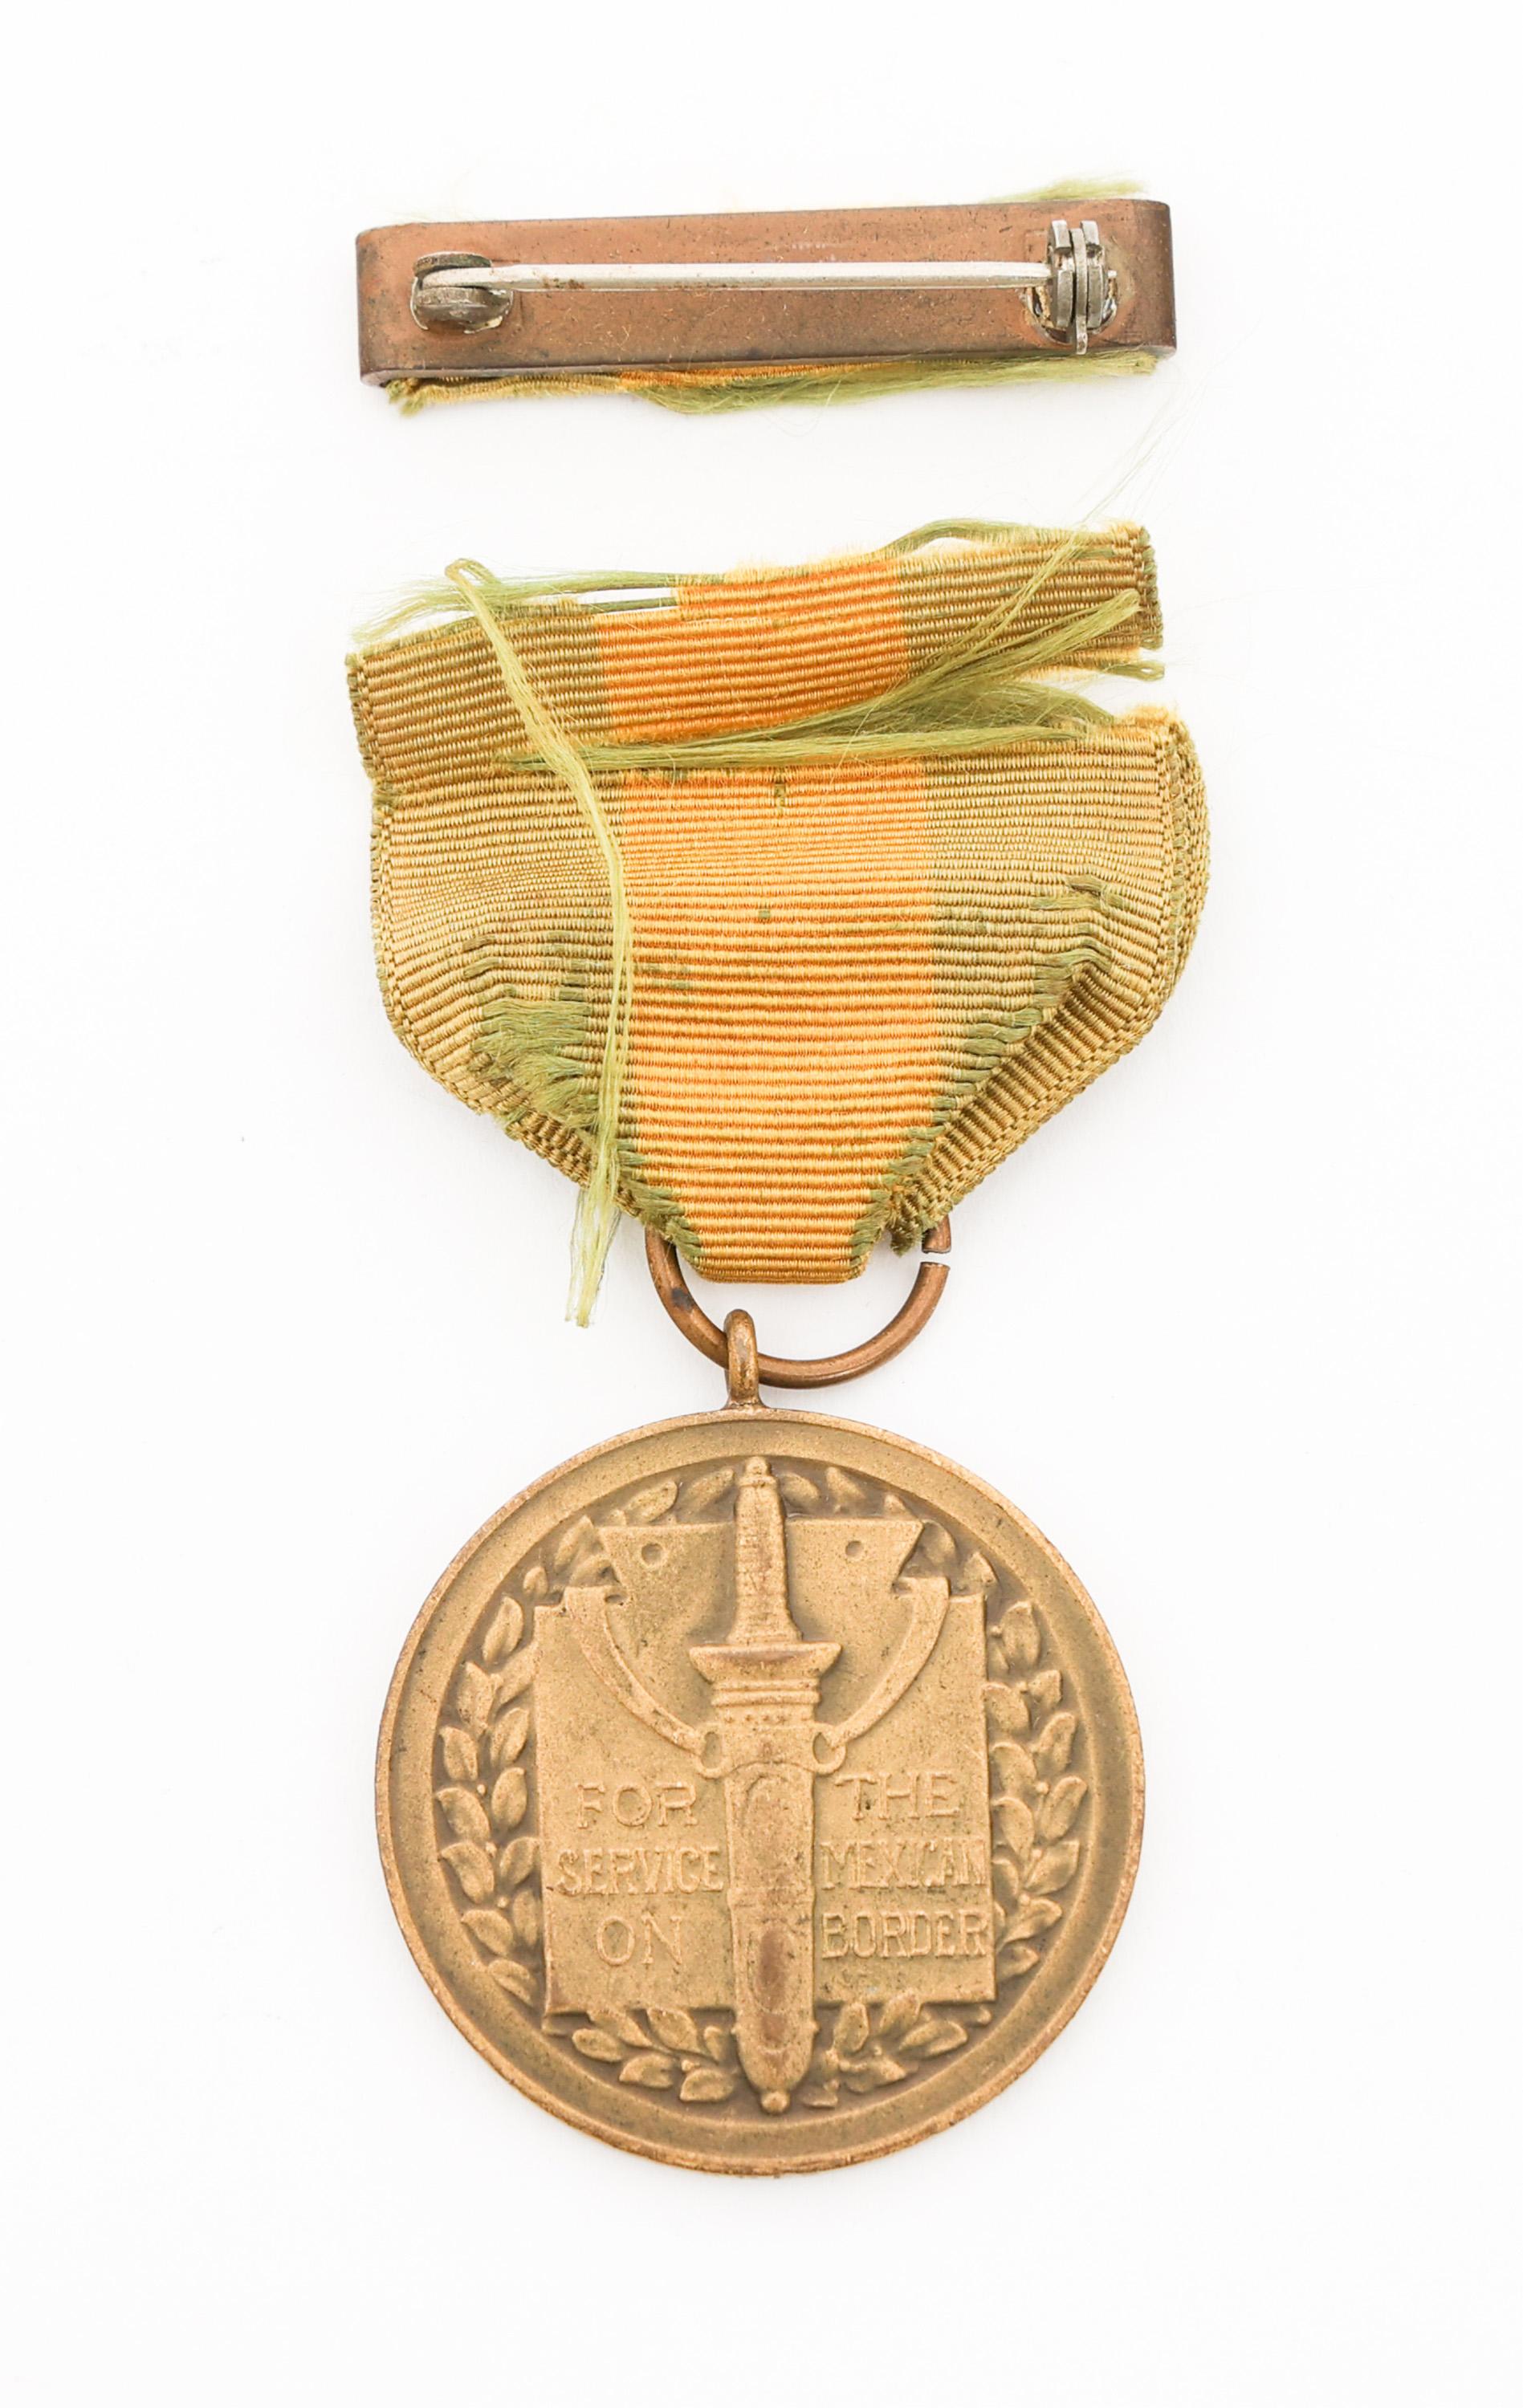 SPAN-AM WAR - WWI MEXICAN BORDER & CAMPAIGN MEDALS